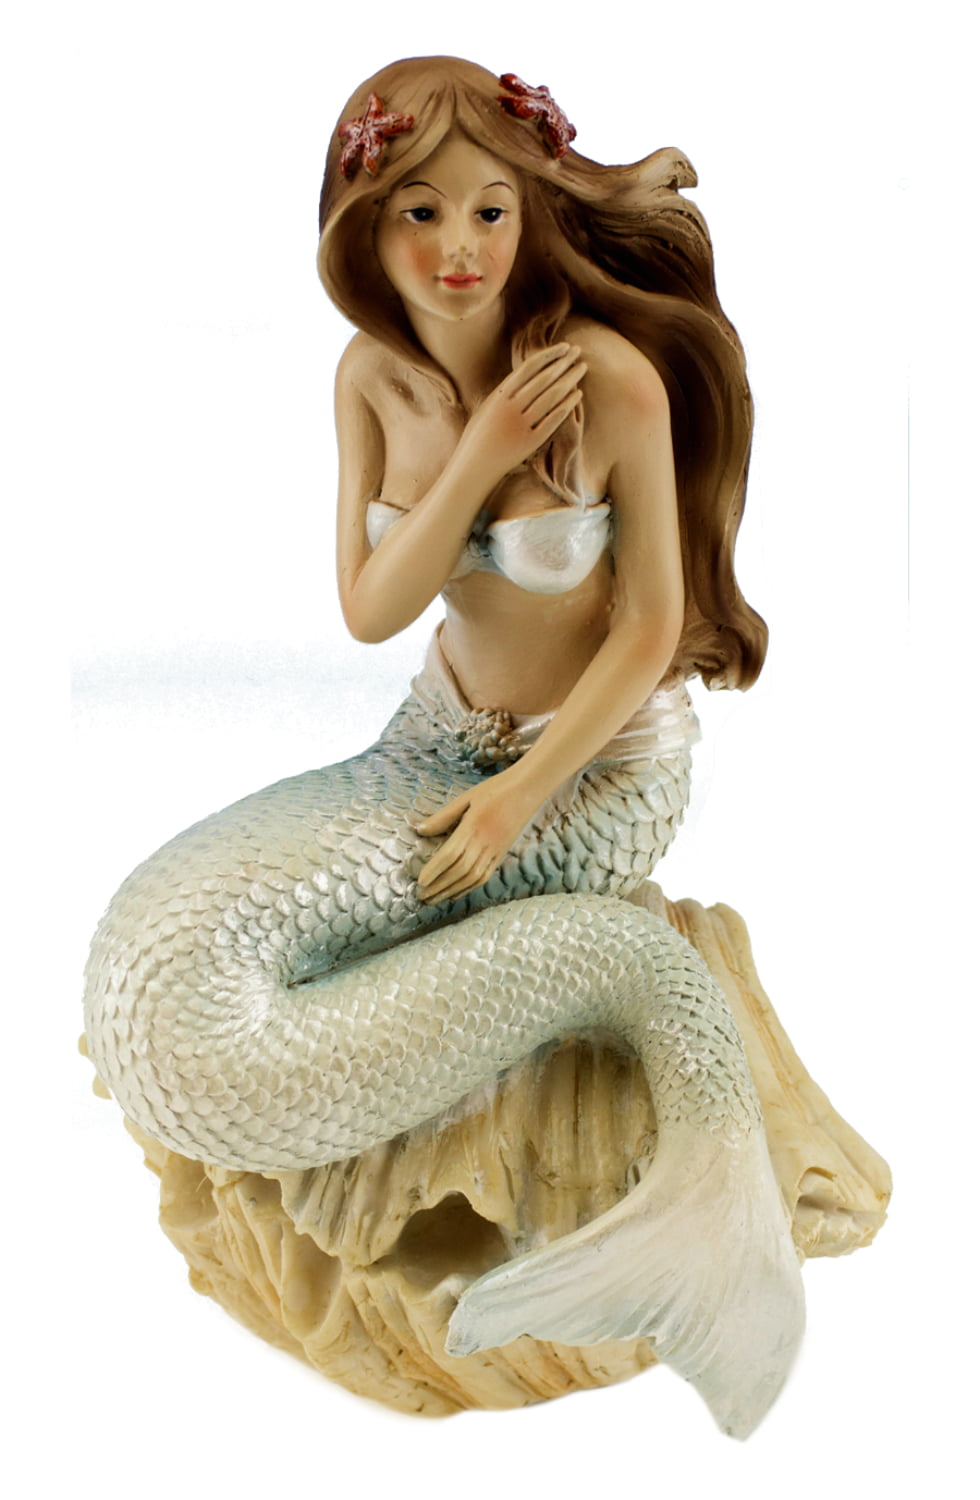 Mermaid Queen Lounging in a Shell and Coral Throne Home Decor